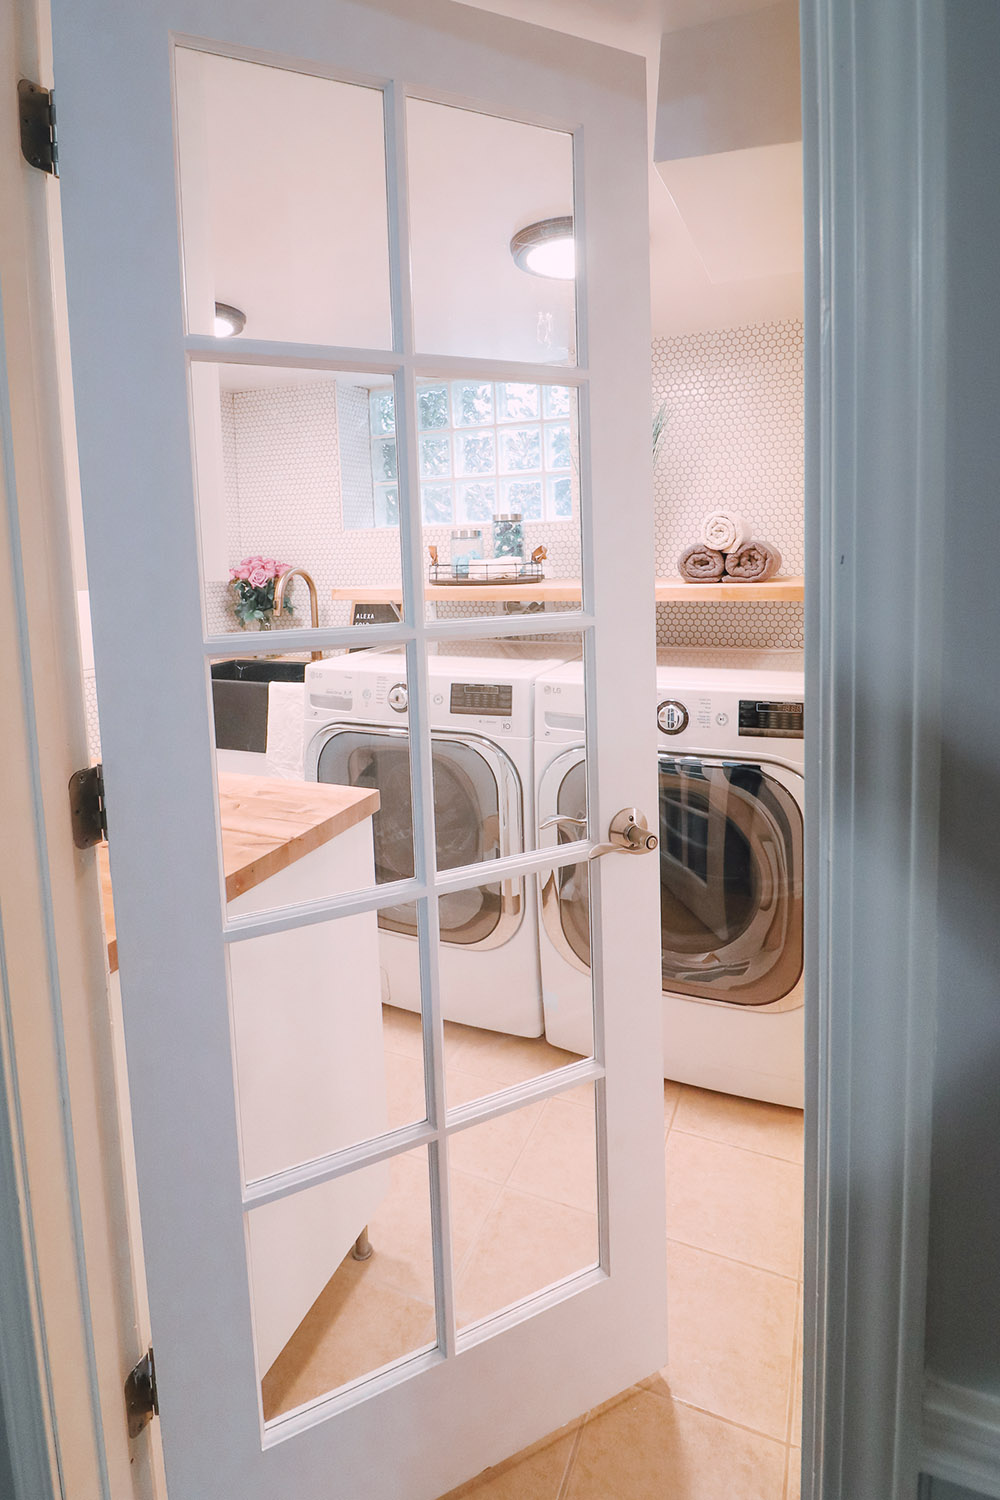 A white shaker door with glass opening into a laundry room.